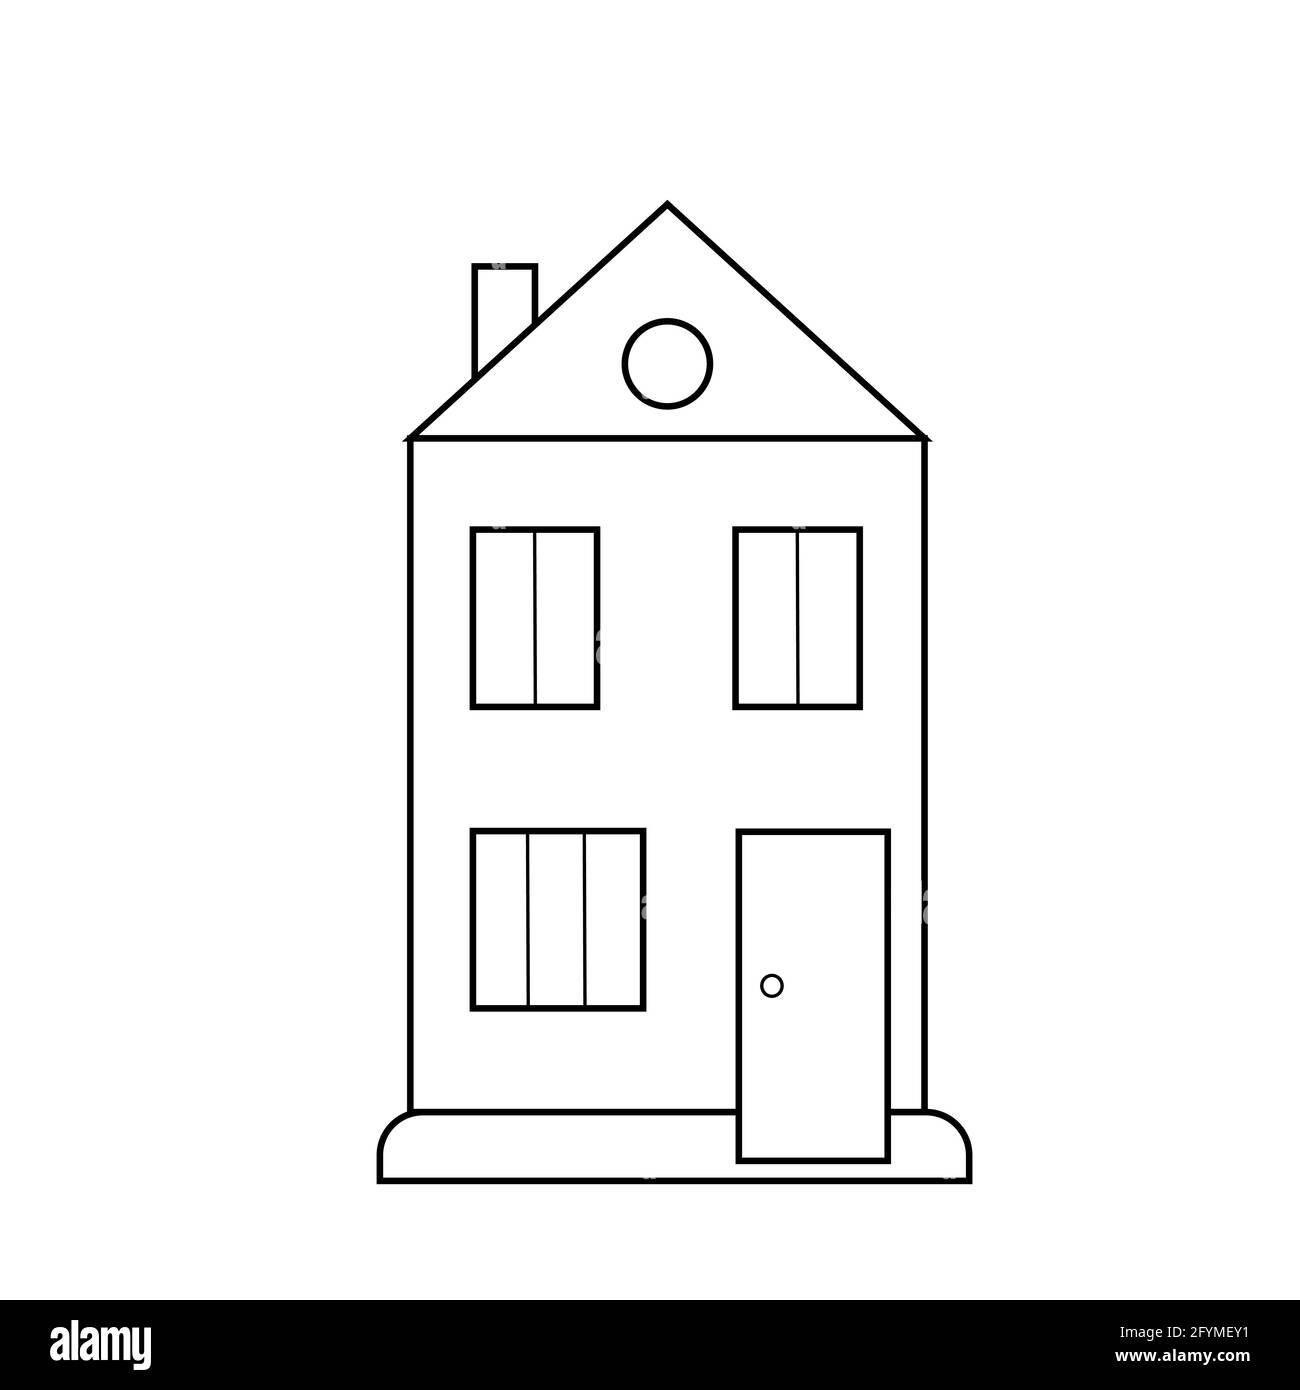 Simple outline black and white house icon vector illustration, residential building icon, sweet cozy home concept Stock Vector